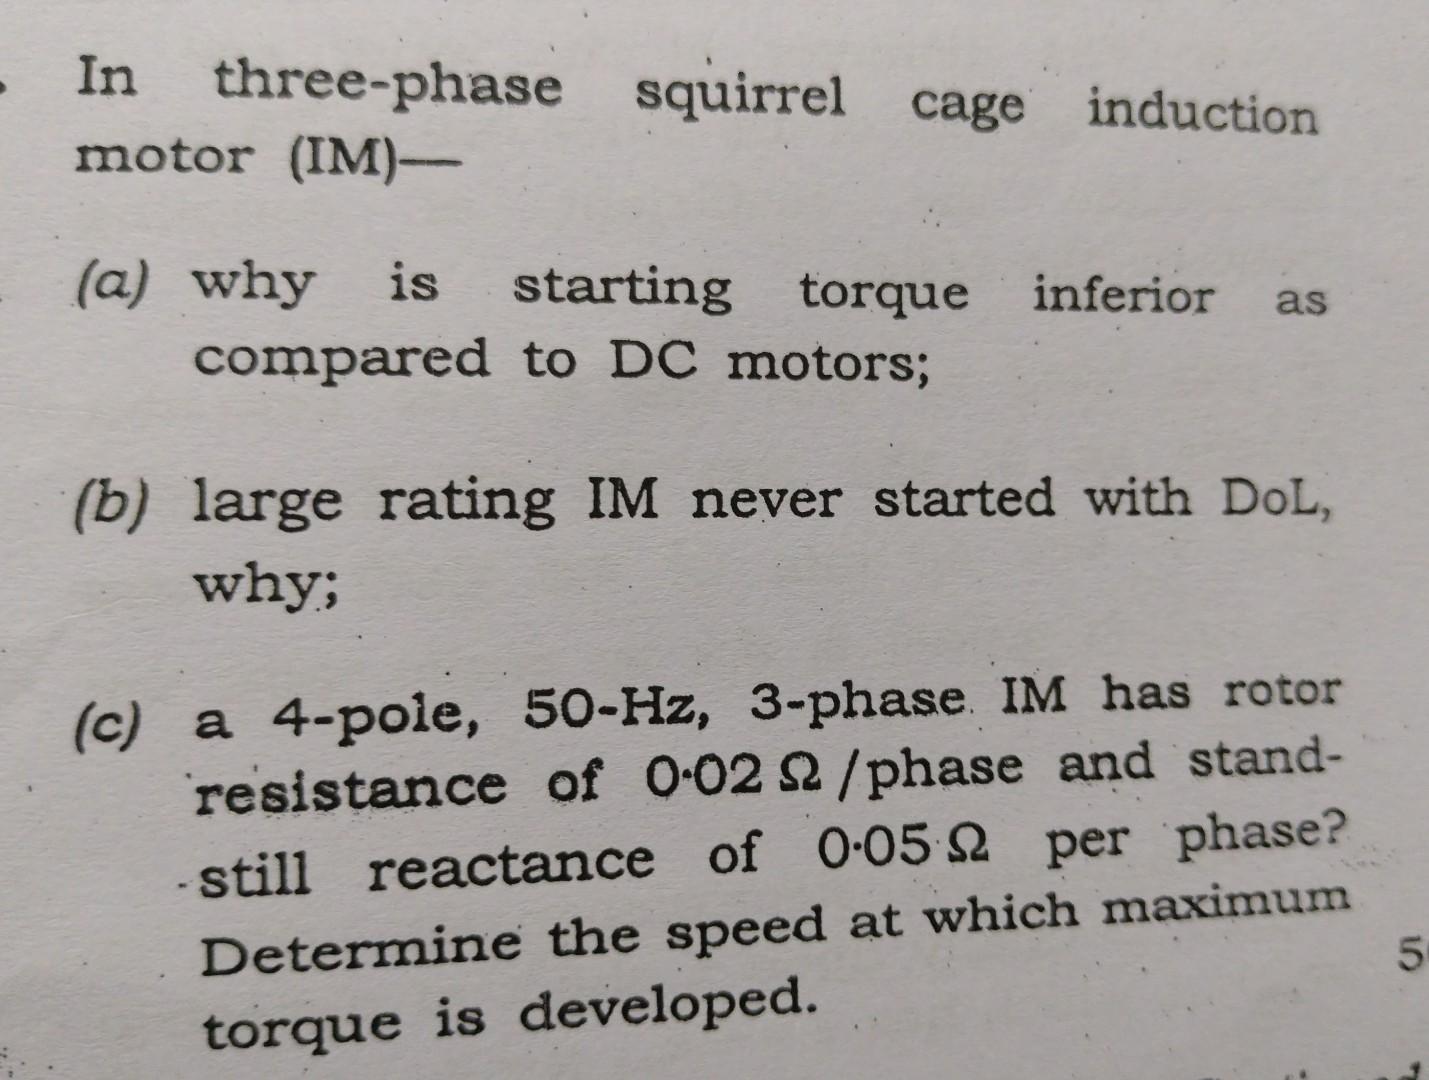 In three-phase squirrel cage induction motor (IM)-
(a) why is starting torque inferior as compared to DC motors;
(b) large ra